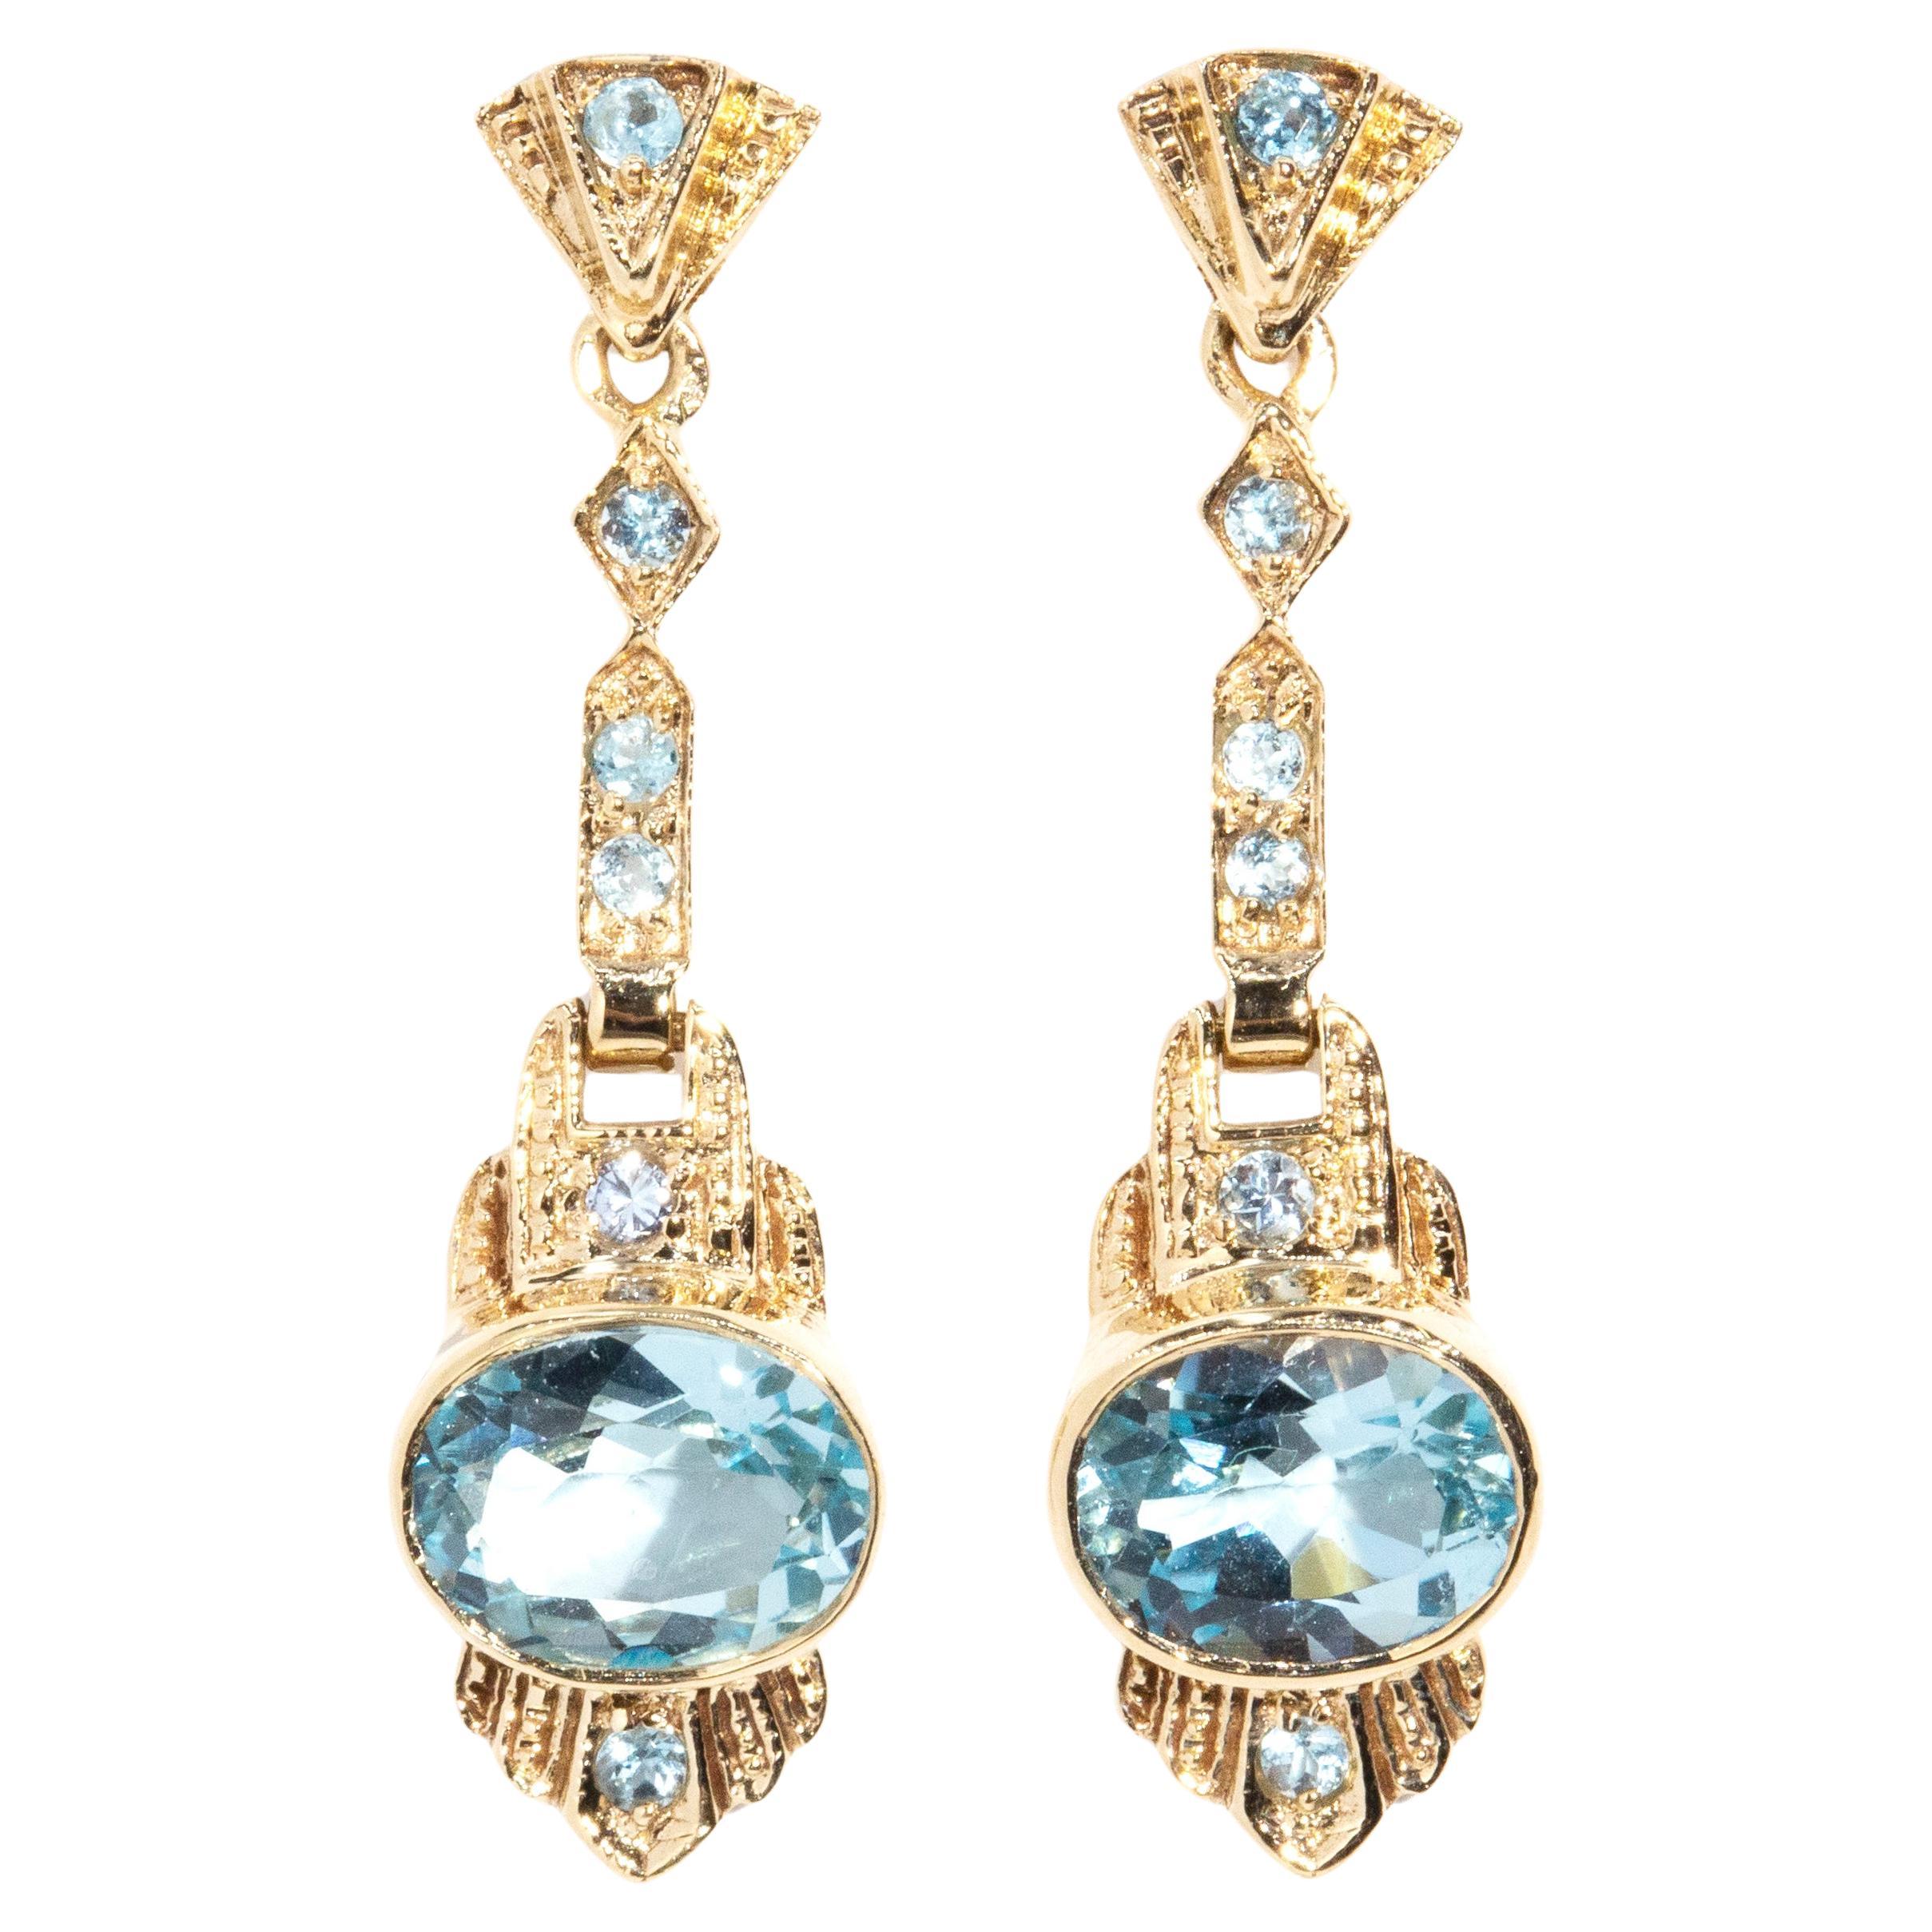 Vintage Inspired Bright Blue Topaz Art Deco Style Drop Earrings 9 Carat Gold